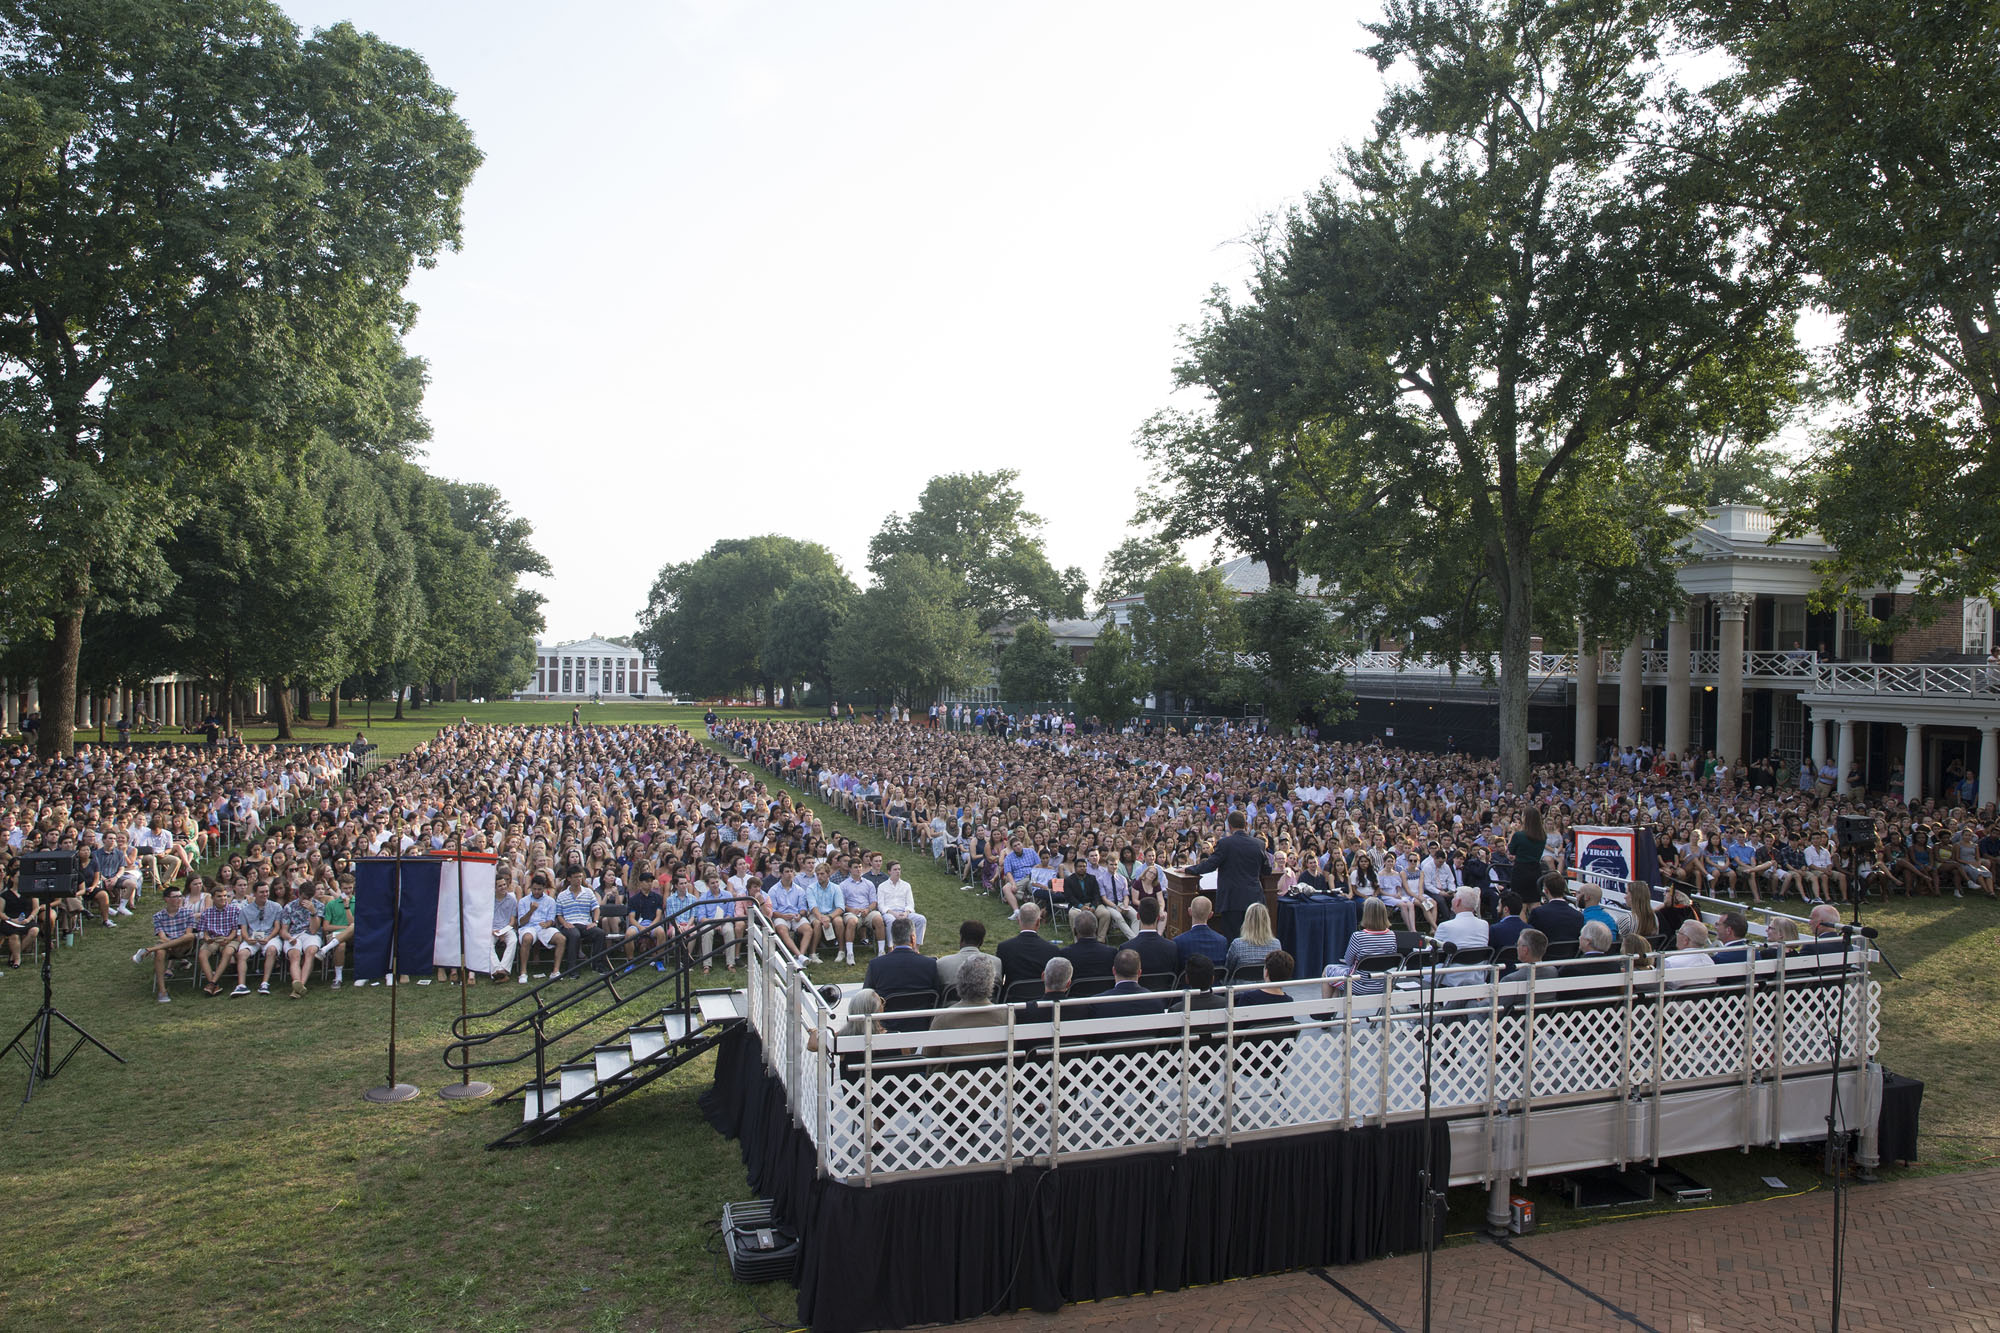 Class of 2022 sitting in chairs on the Lawn with President Ryan speaking from the Podium